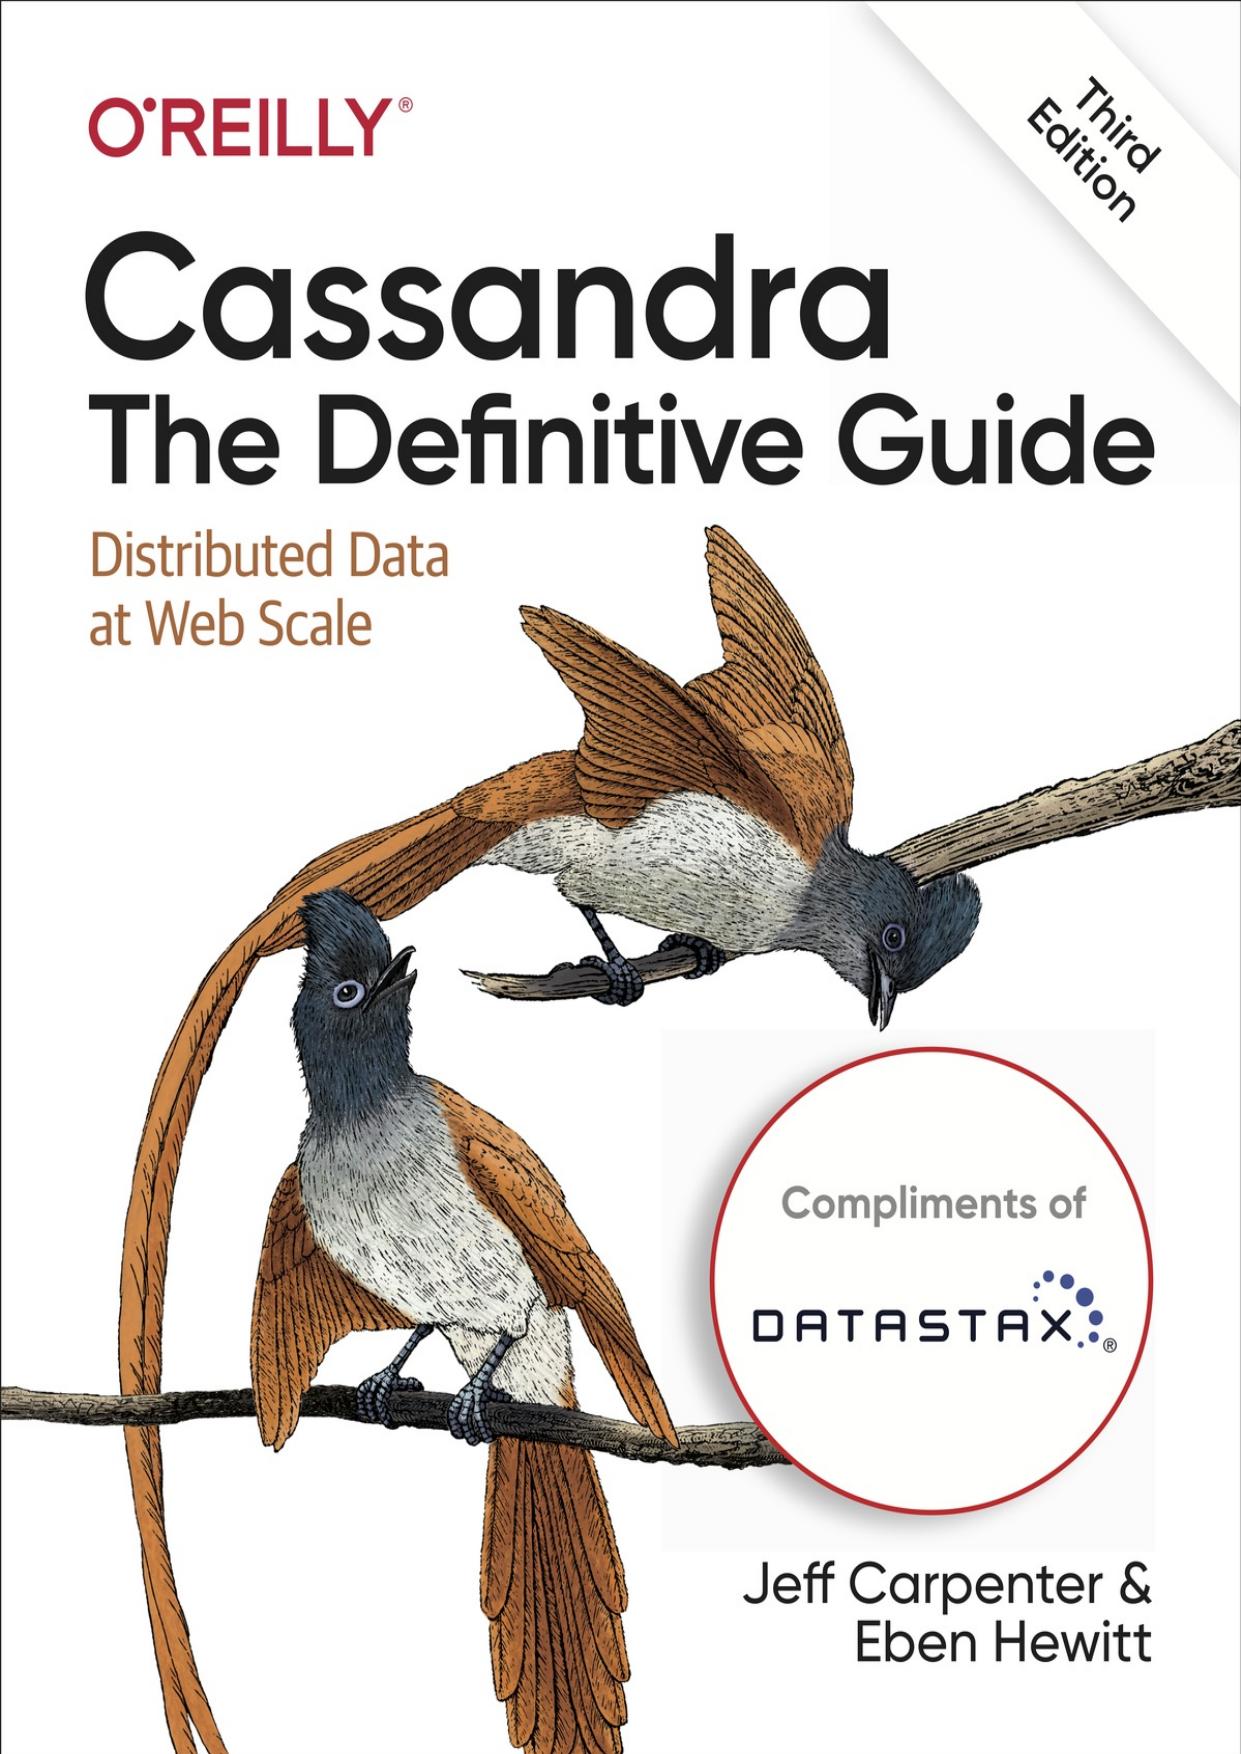 Cassandra: The Definitive Guide - DataStax version, 3rd Edition